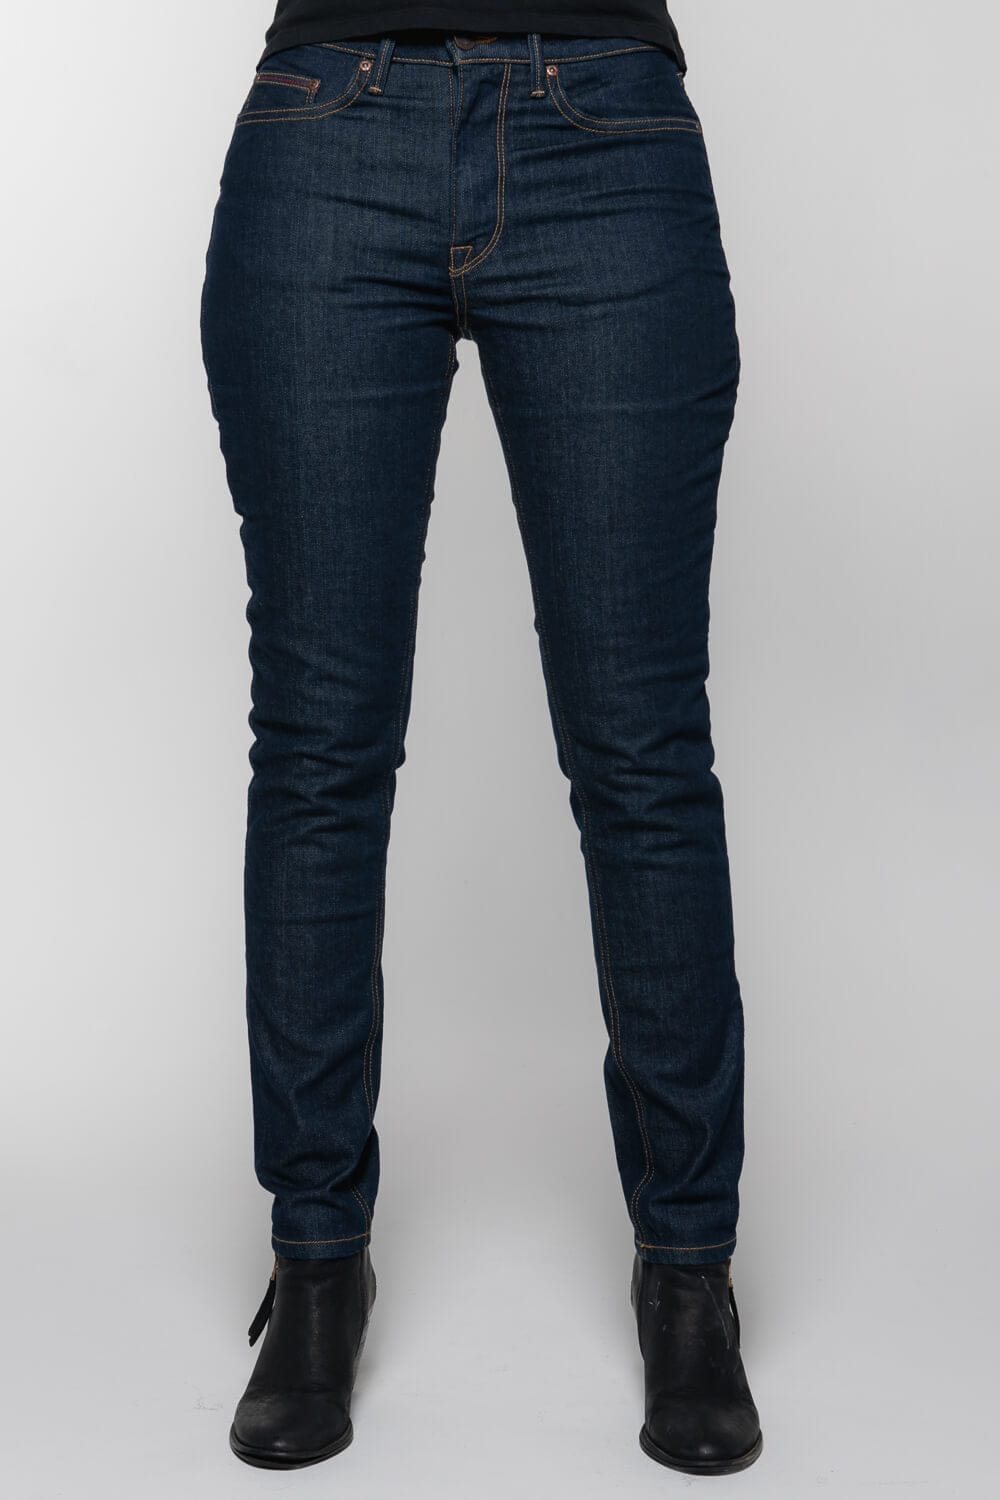 Ironsides Indigo Armored Denim Jeans. Features Protective DuPont